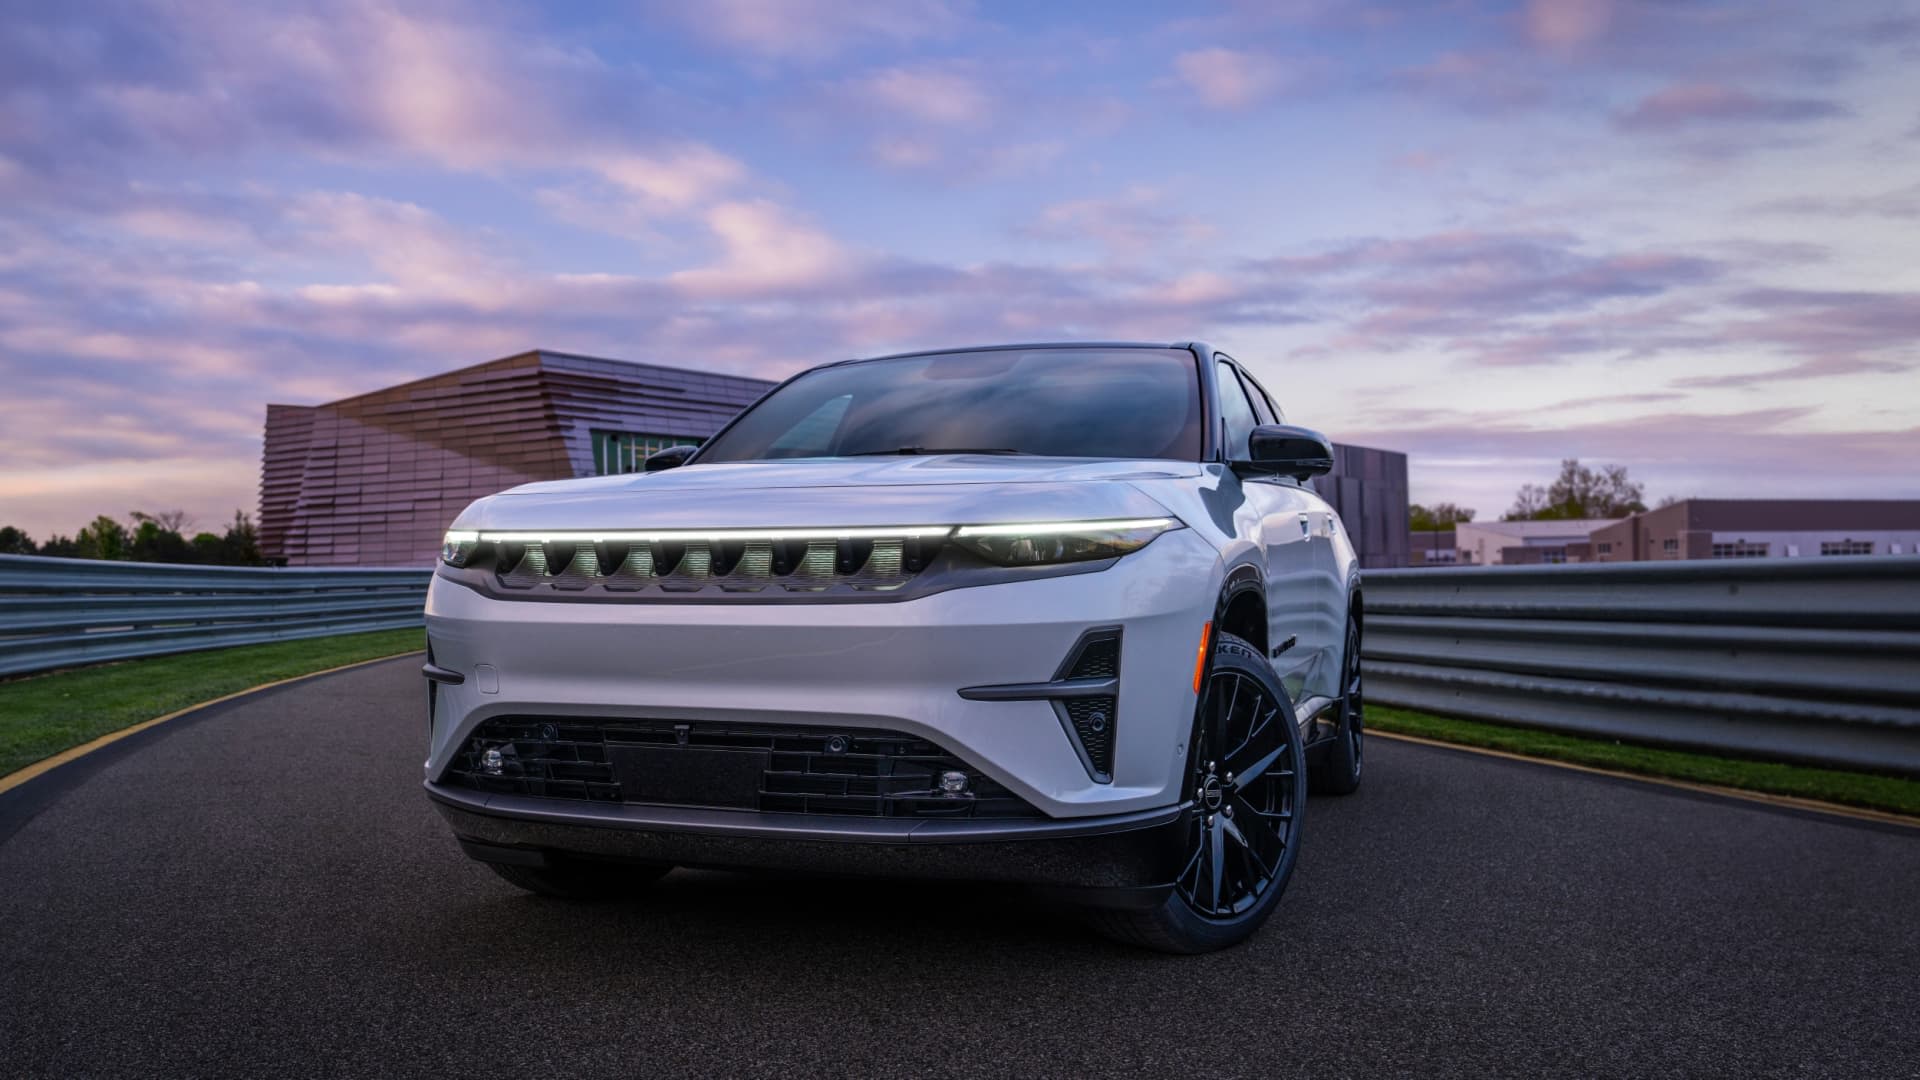 Jeep reveals all-electric Wagoneer S in EV offensive, starting at $72,000